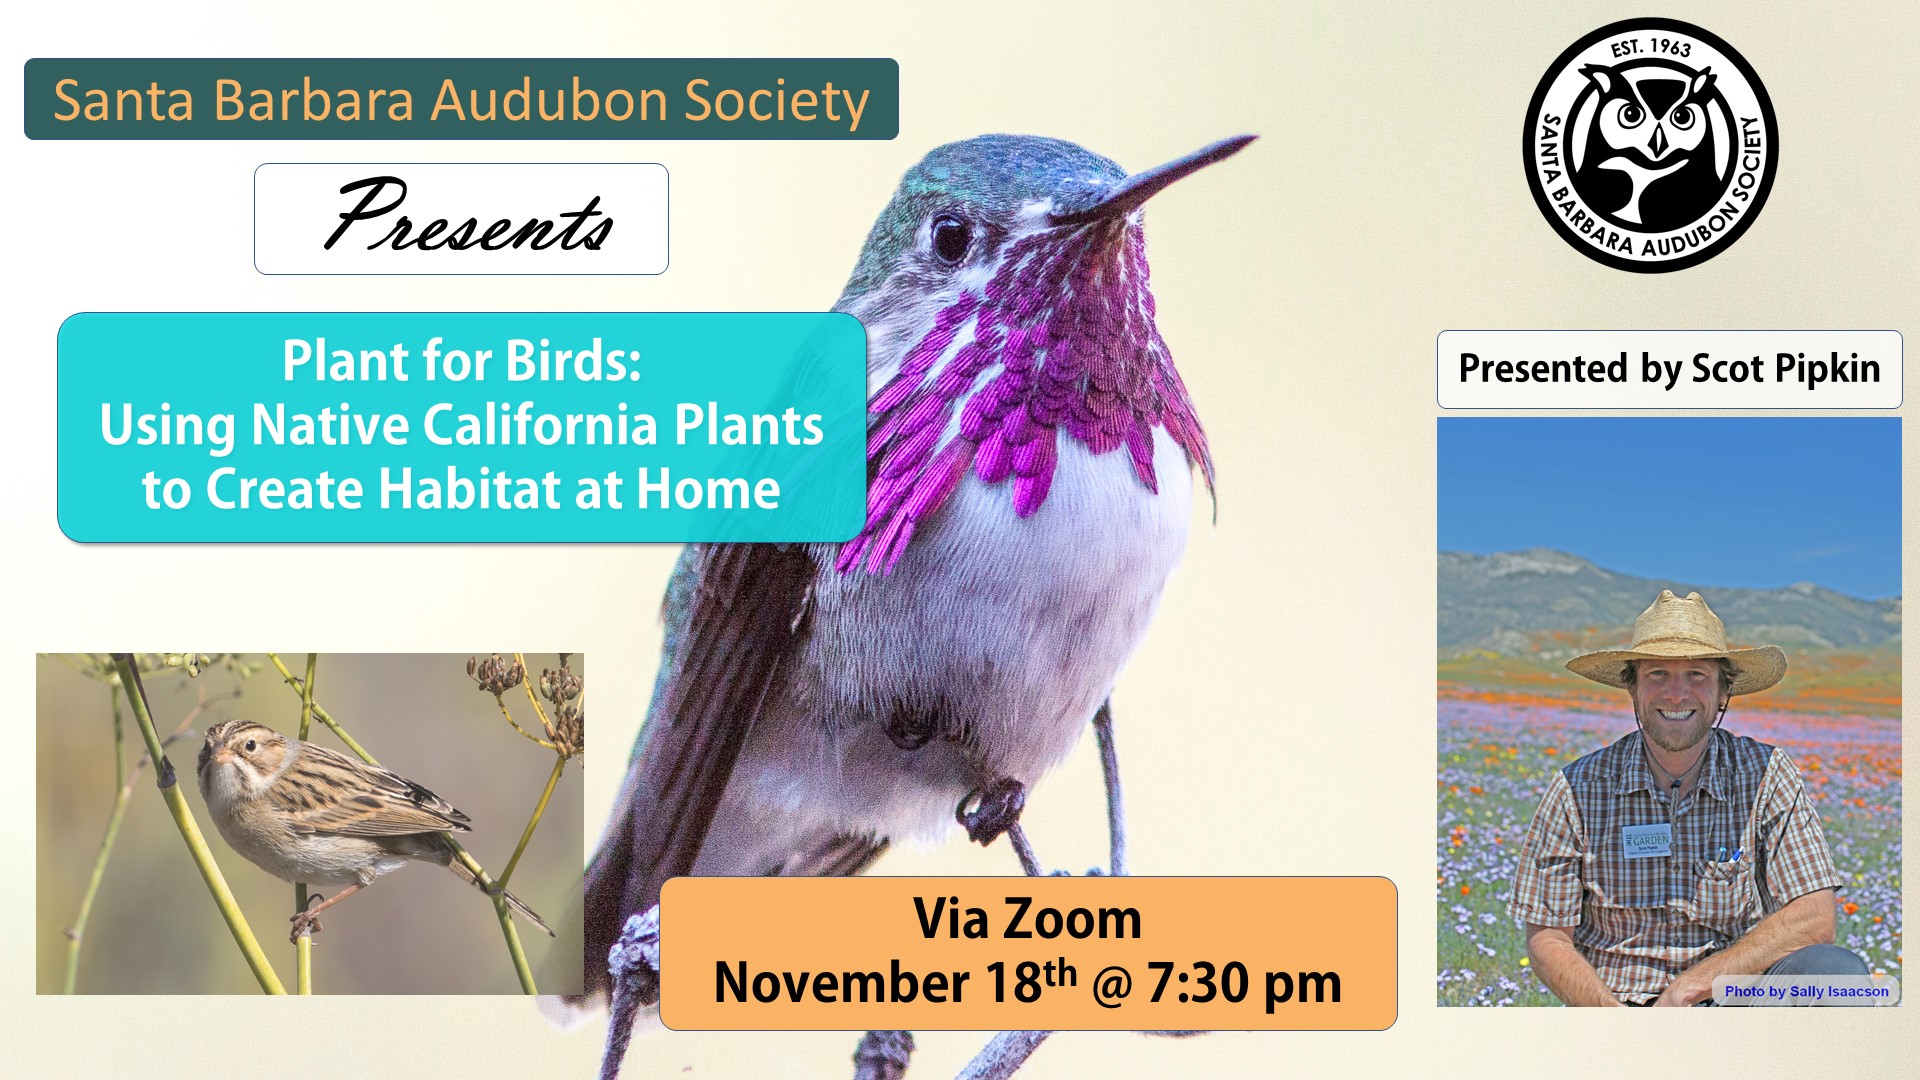 Plant for Birds: Using Native California Plants to Create Habitat at Home